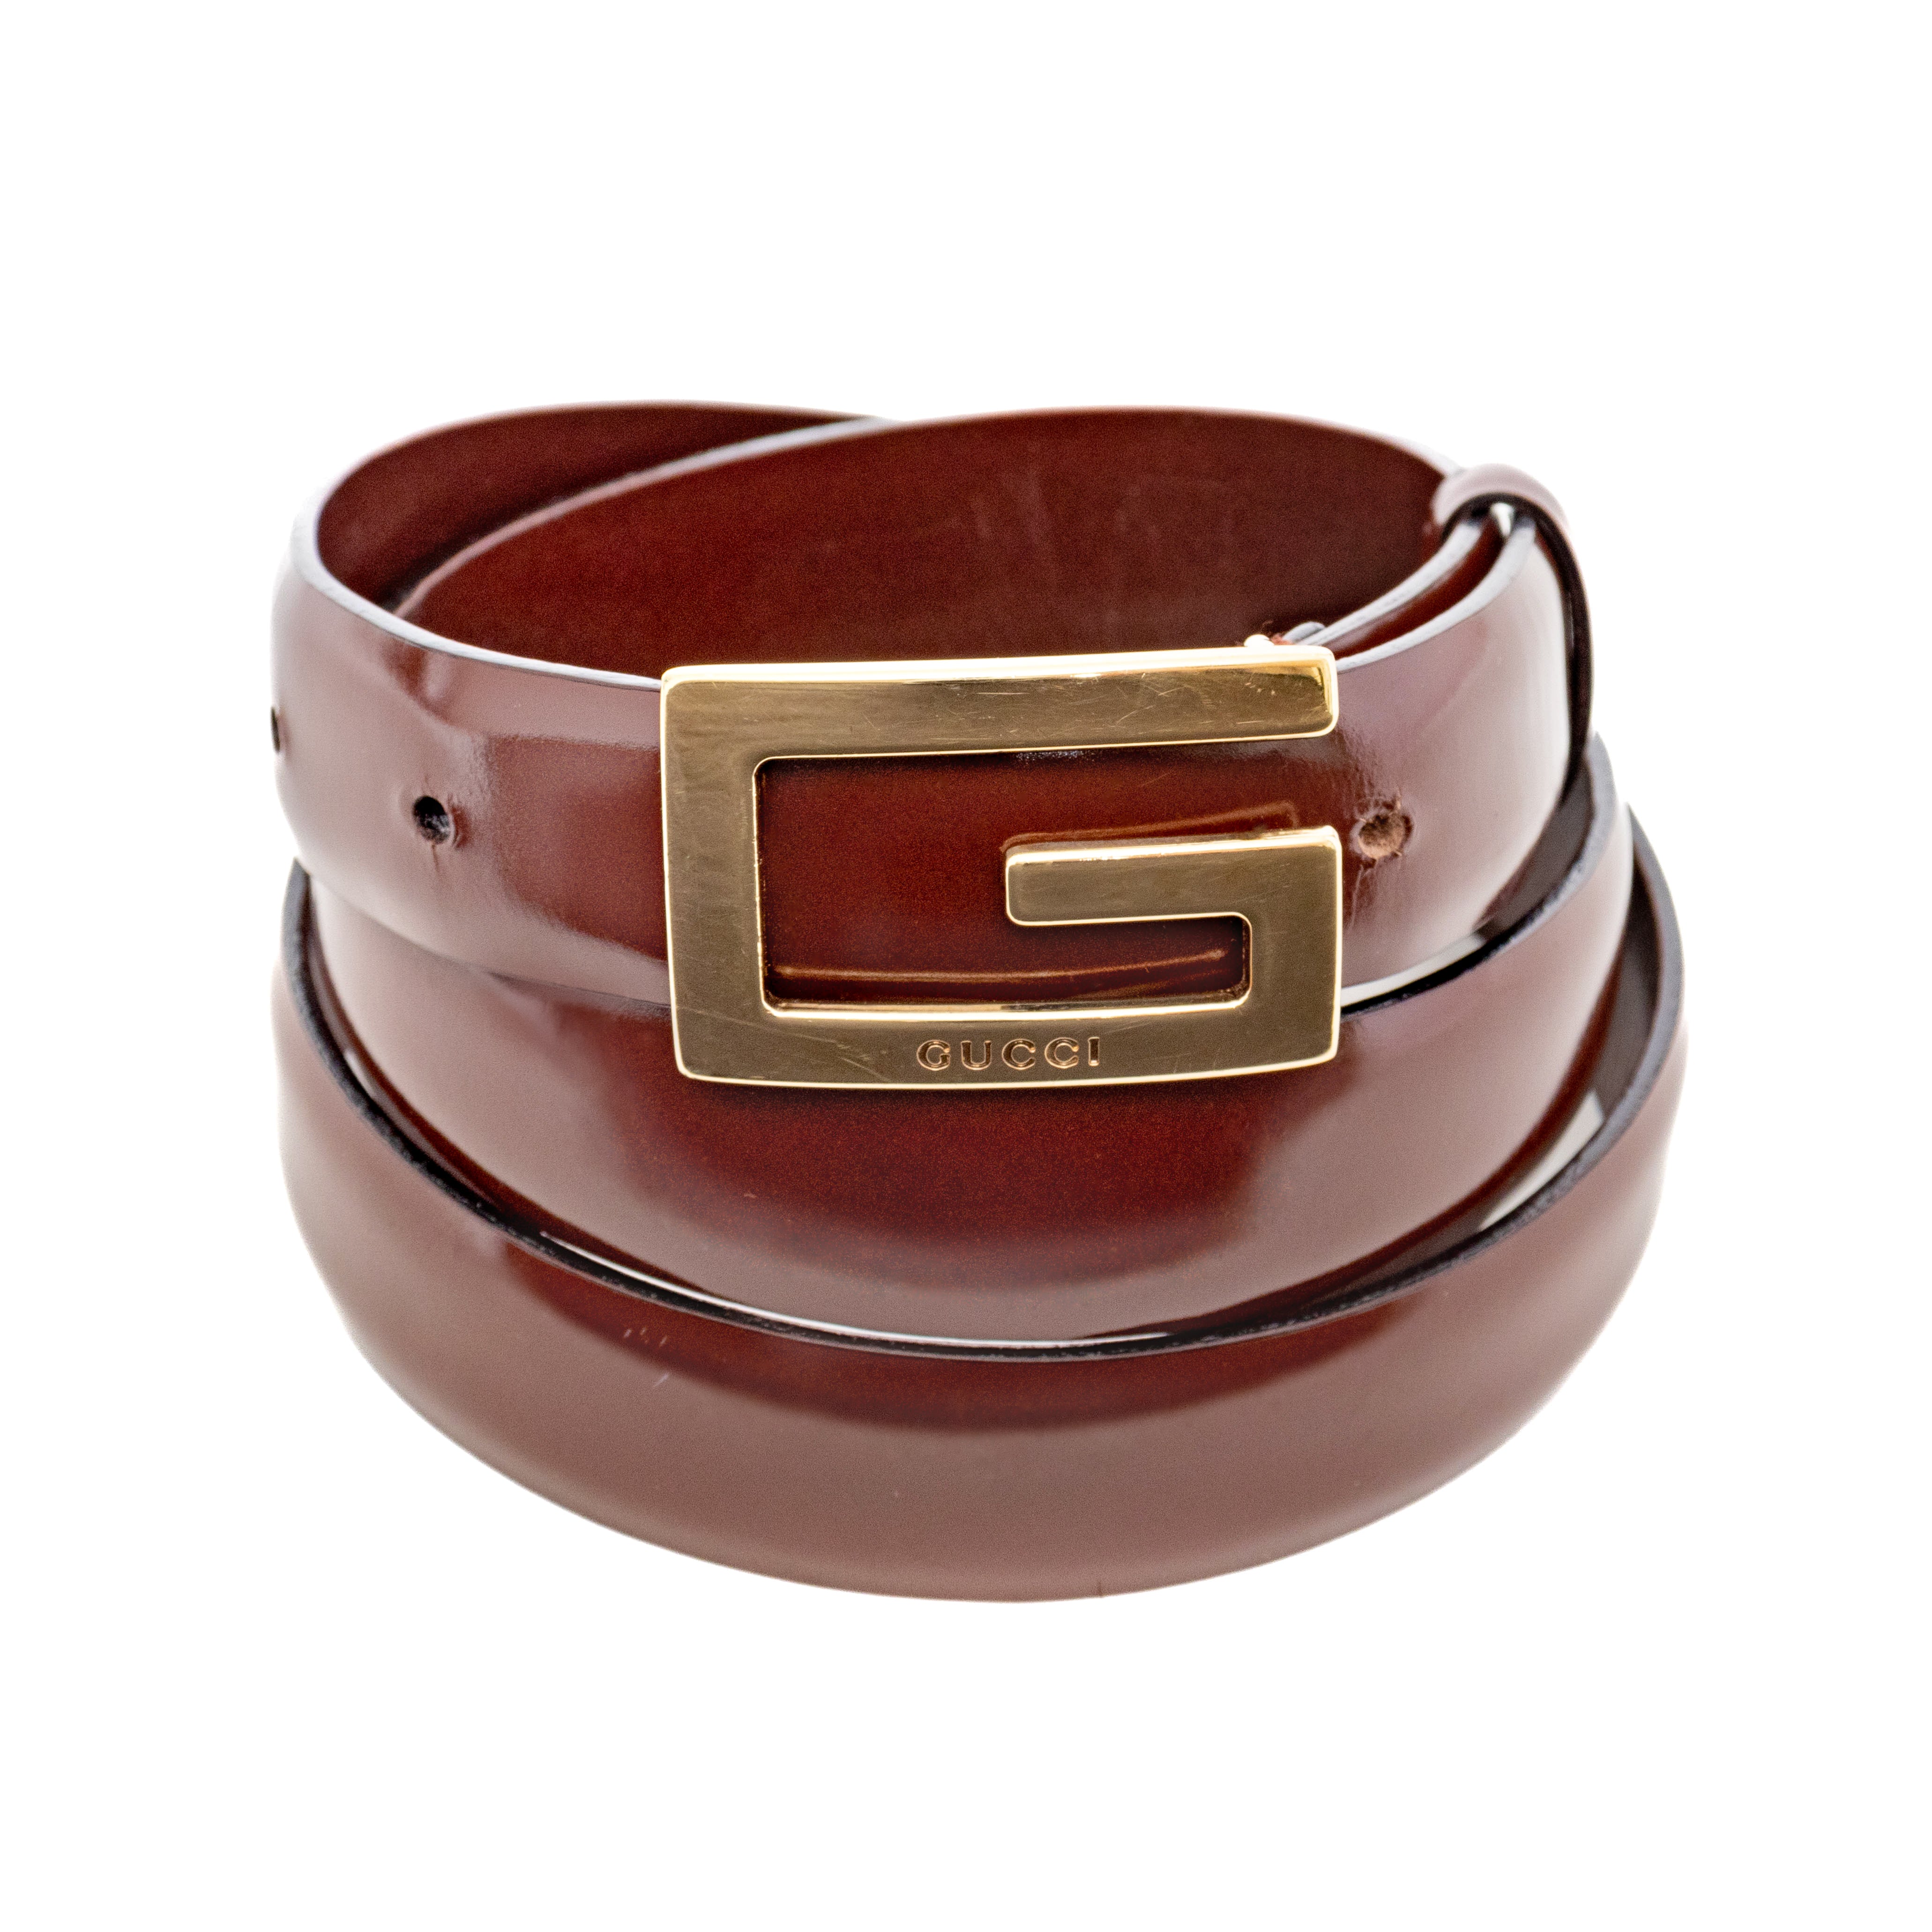 Vintage Red Gucci Belt Made in Italy Classy Belt Buckle 